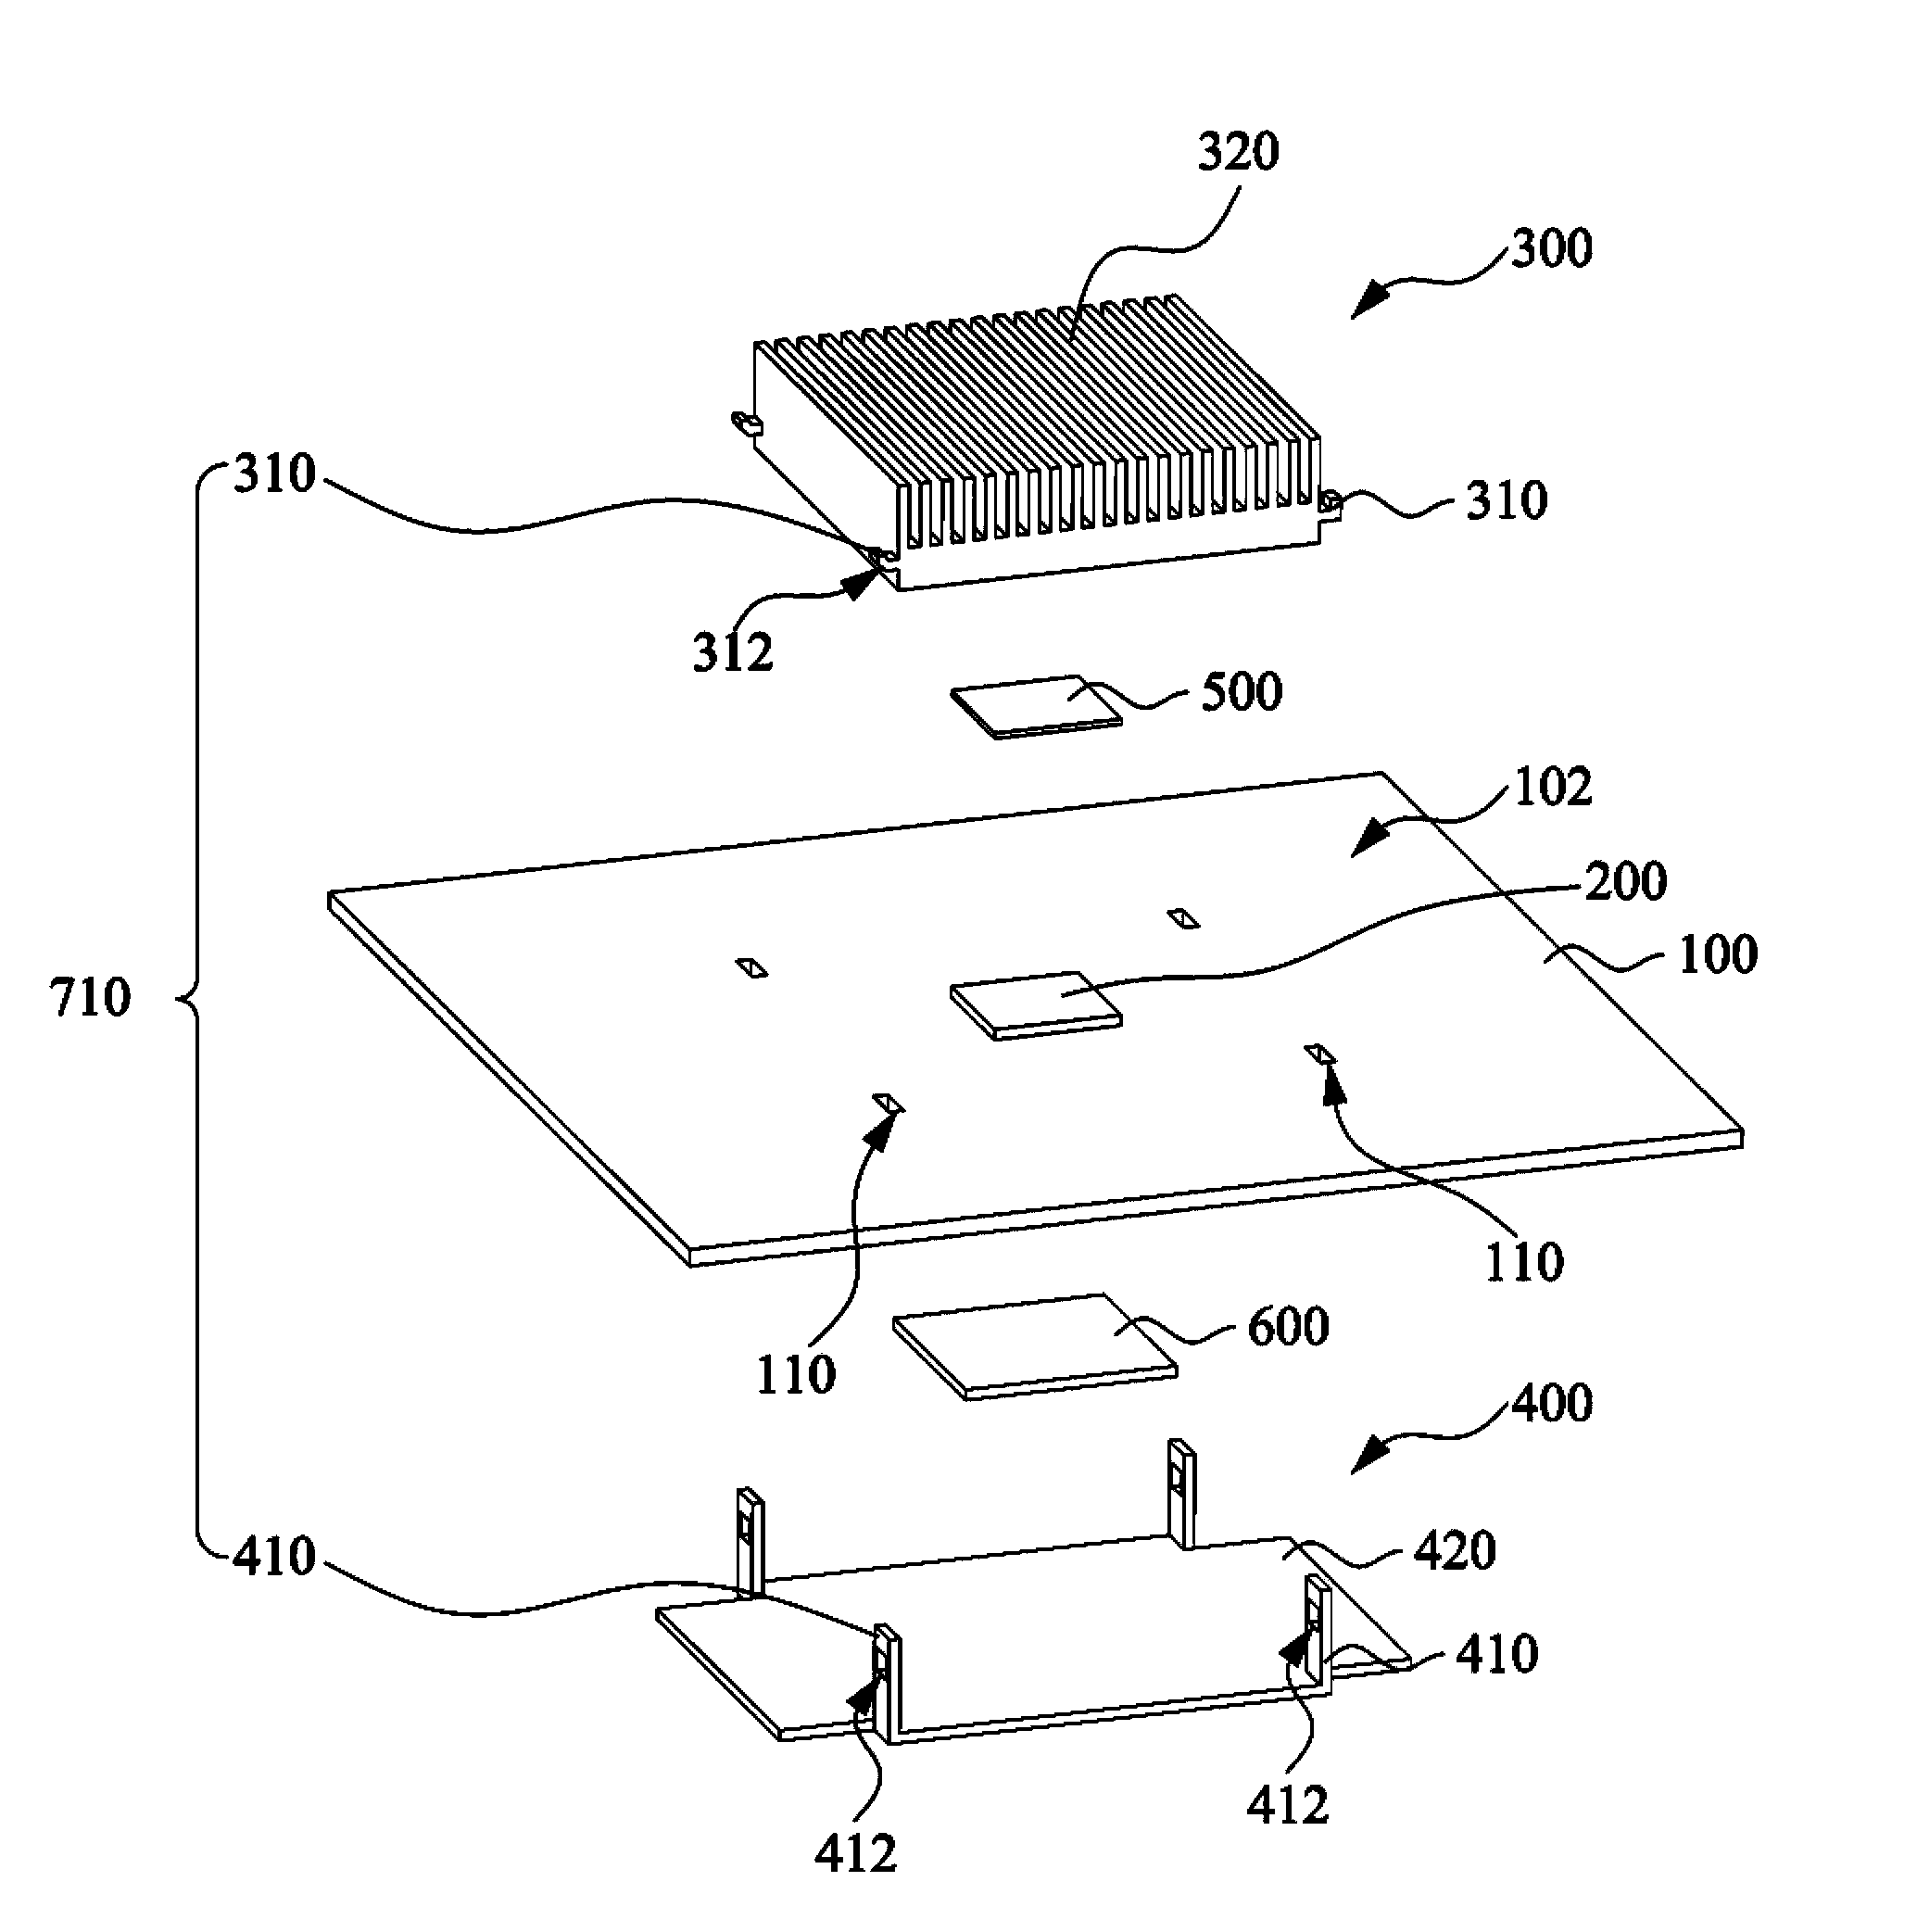 Heat dissipation assembly structure